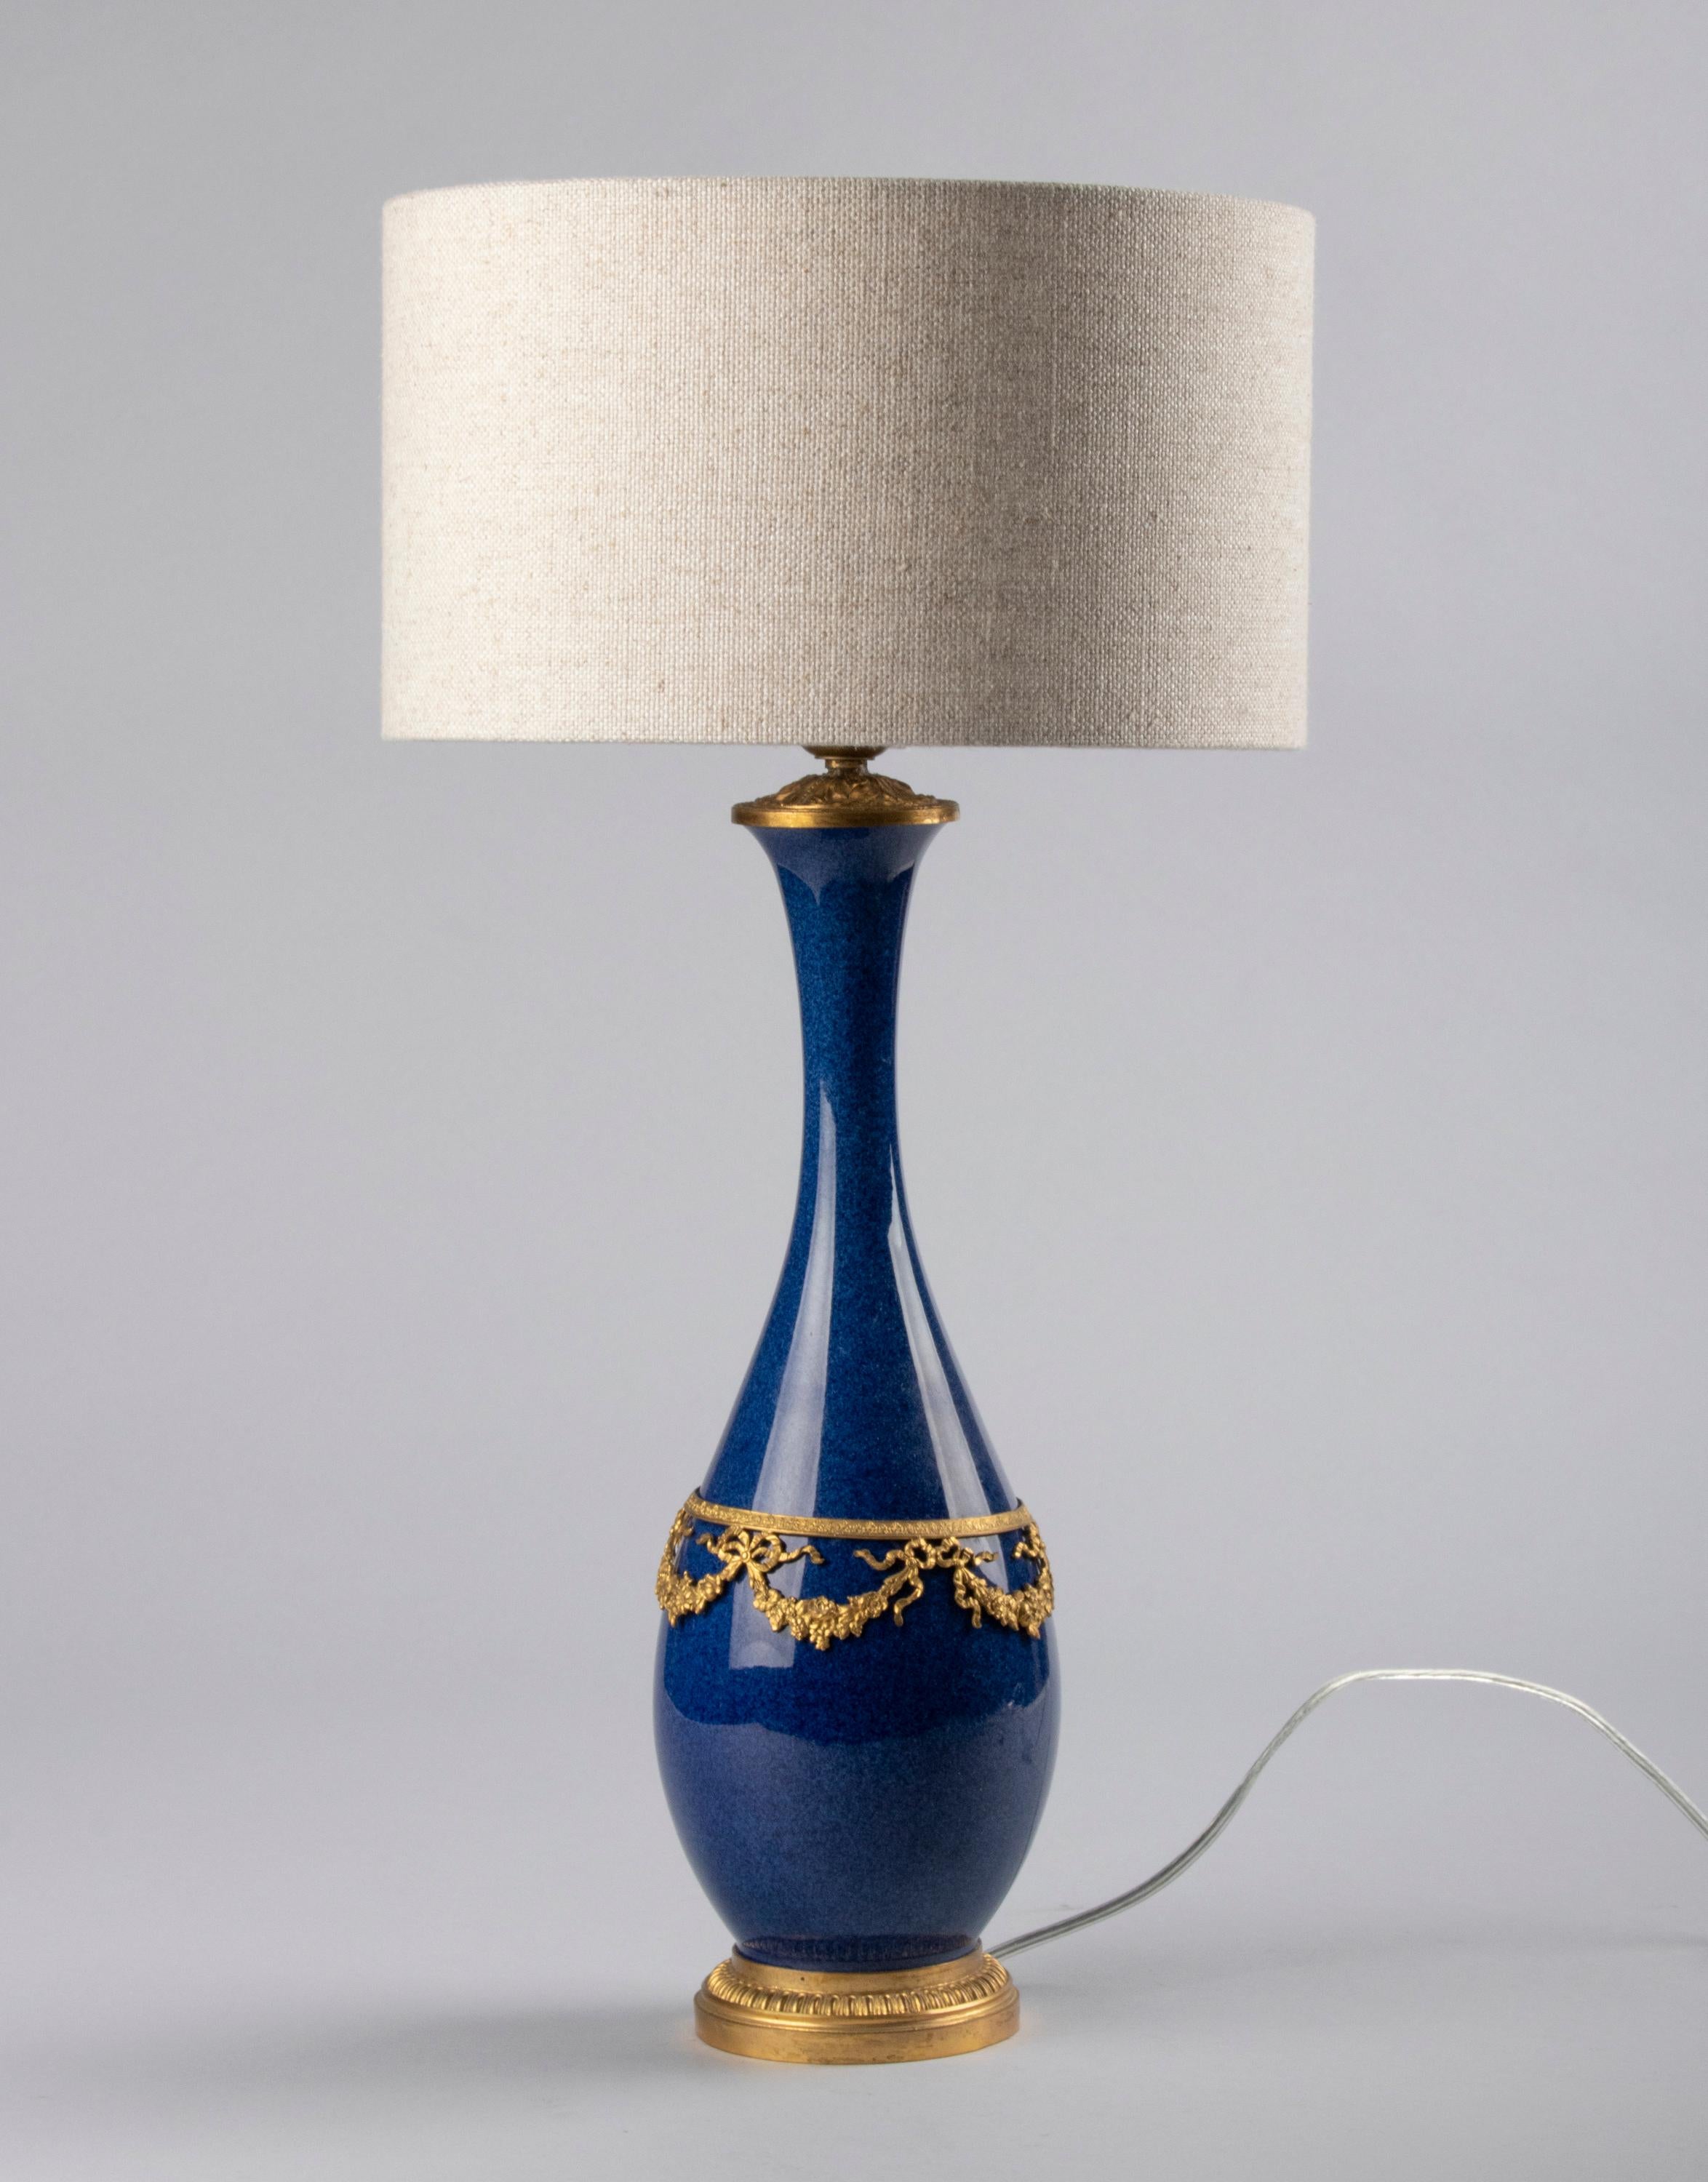 Hand-Crafted Early 20th Century Table Lamp by Sèvres Louis XVI-Style Bronze Gilt Ornaments